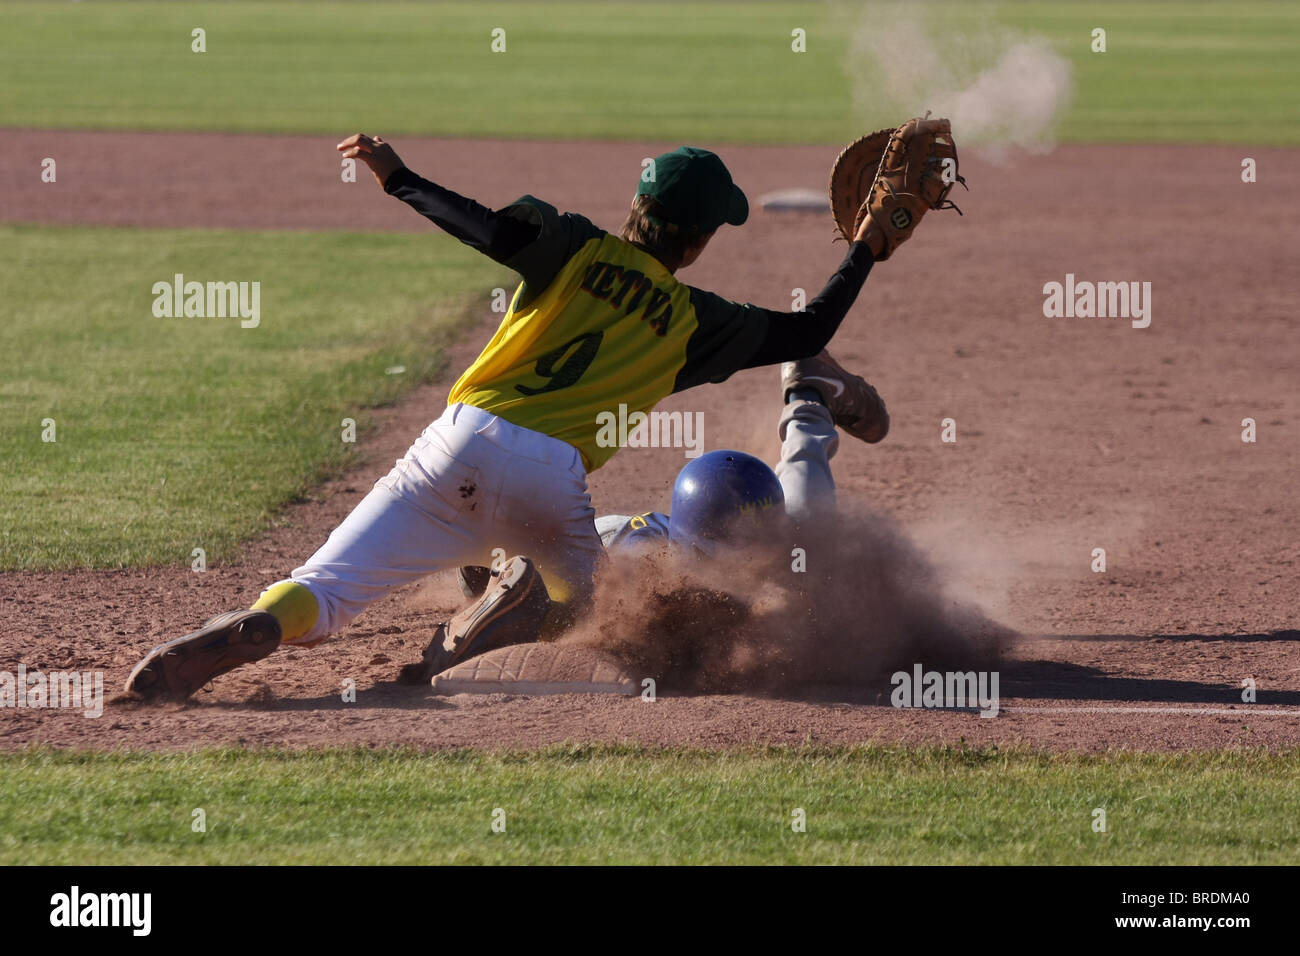 Cadet Qualifier for the European Championships of baseball for cadets. Lithuania beat Sweden by 11-7, but Sweden won the group. Stock Photo